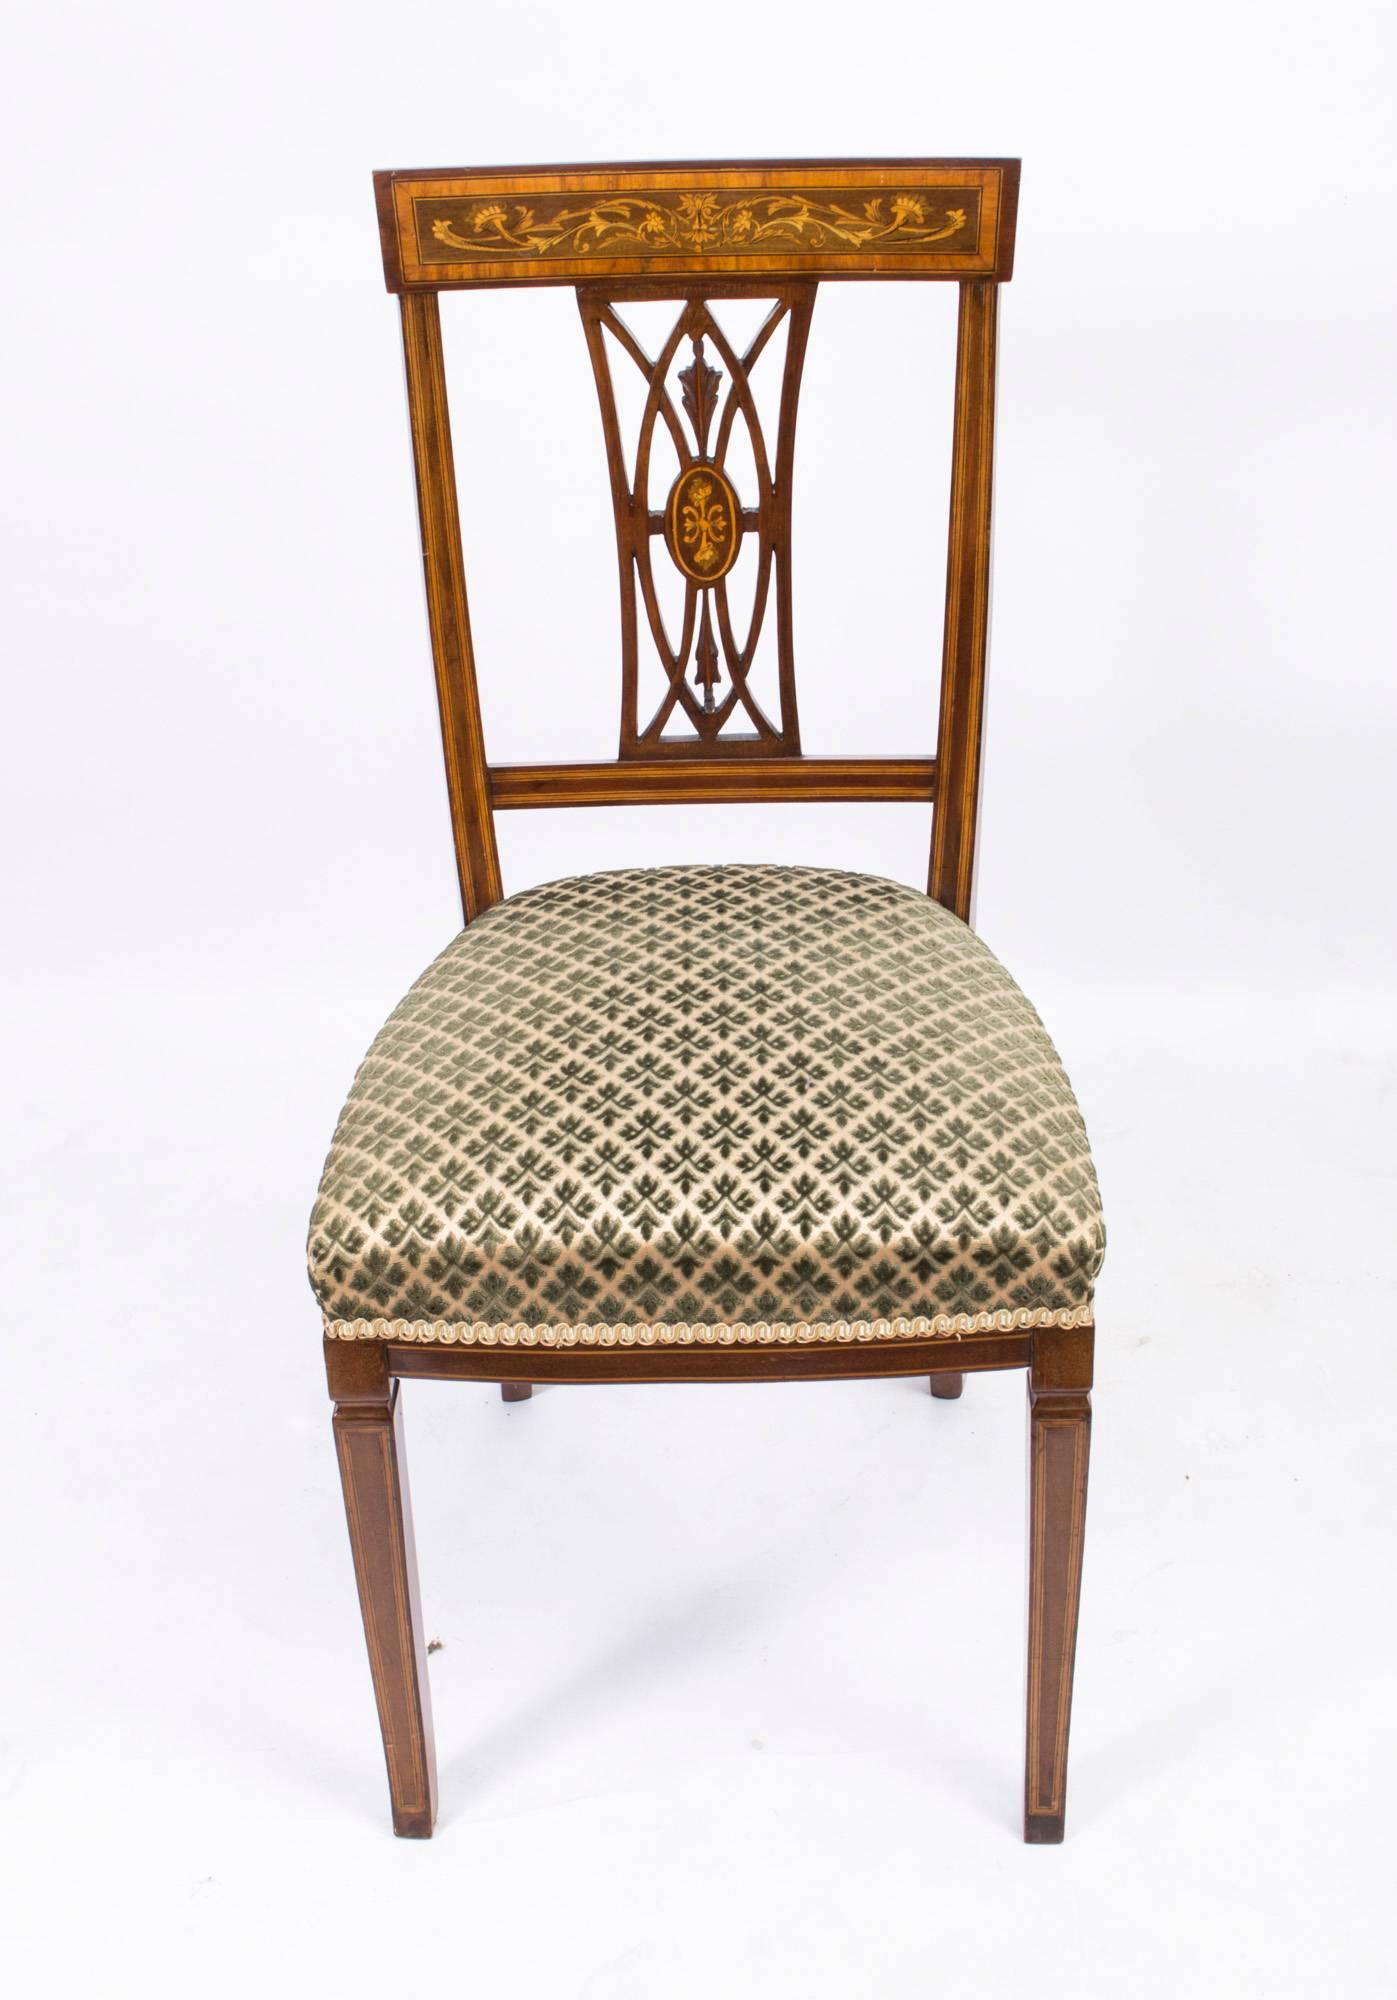 This is a rare set of six antique Edwardian dining chairs, circa 1900 in date.

These chairs have been masterfully crafted in beautiful solid mahogany with satinwood banding and exquisite floral marquetry decoration. 

The set comprises two